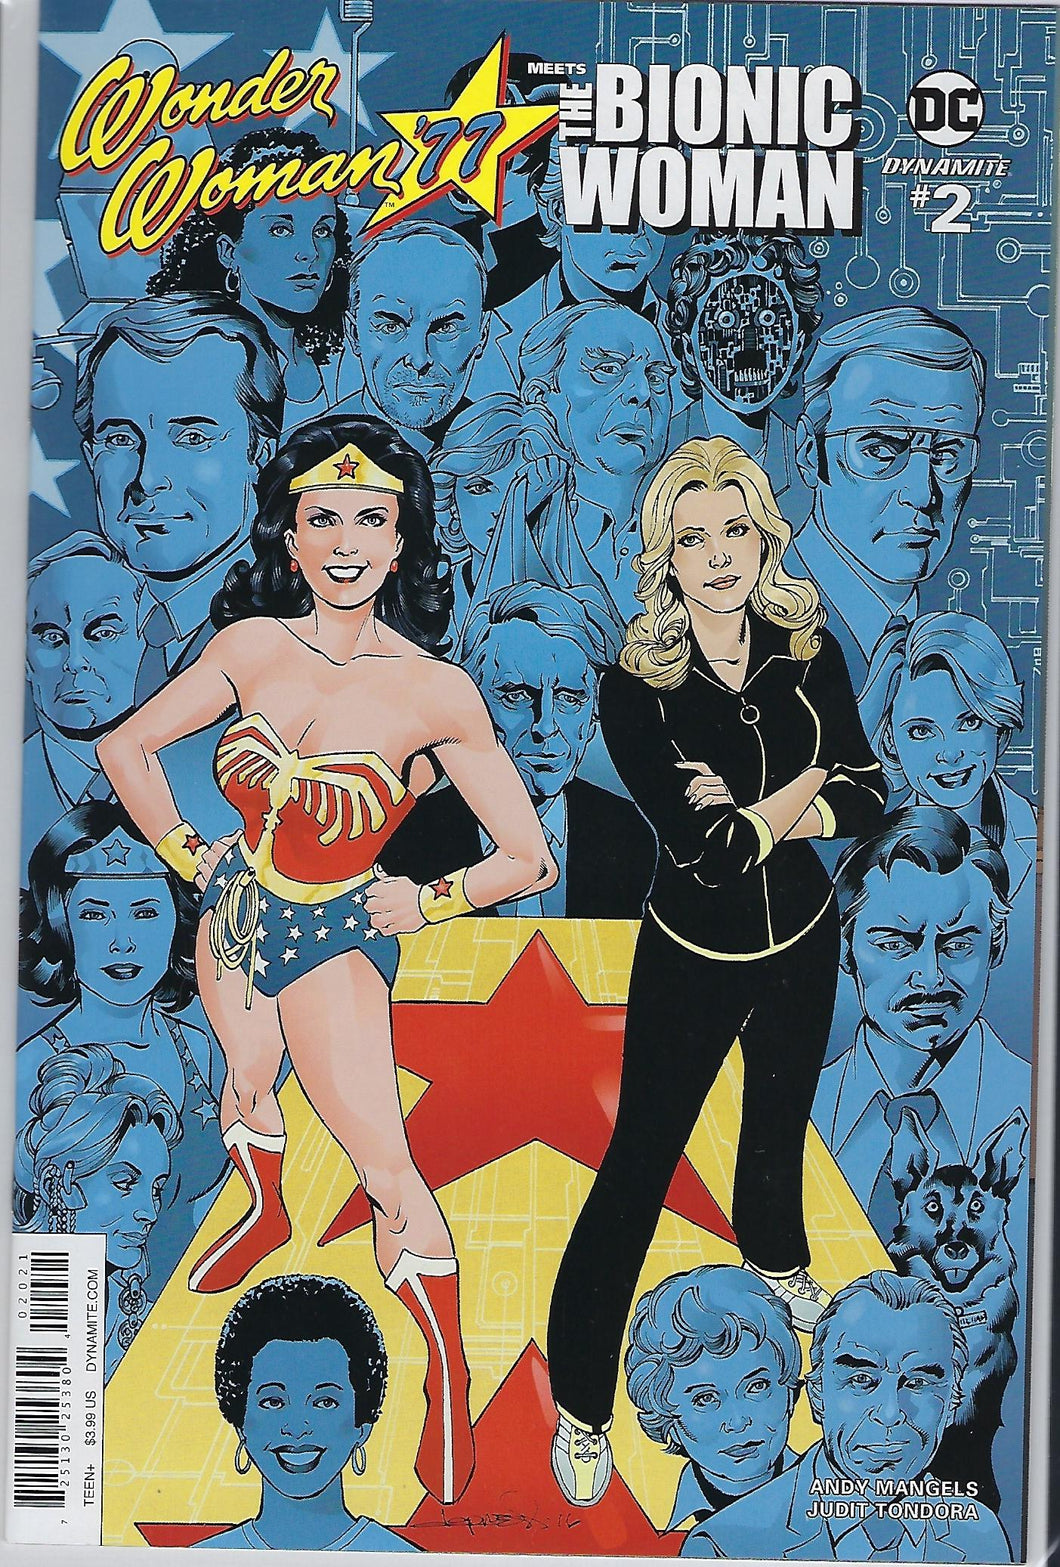 Wonder Woman 77 Meets The Bionic Woman # 2 Cover 